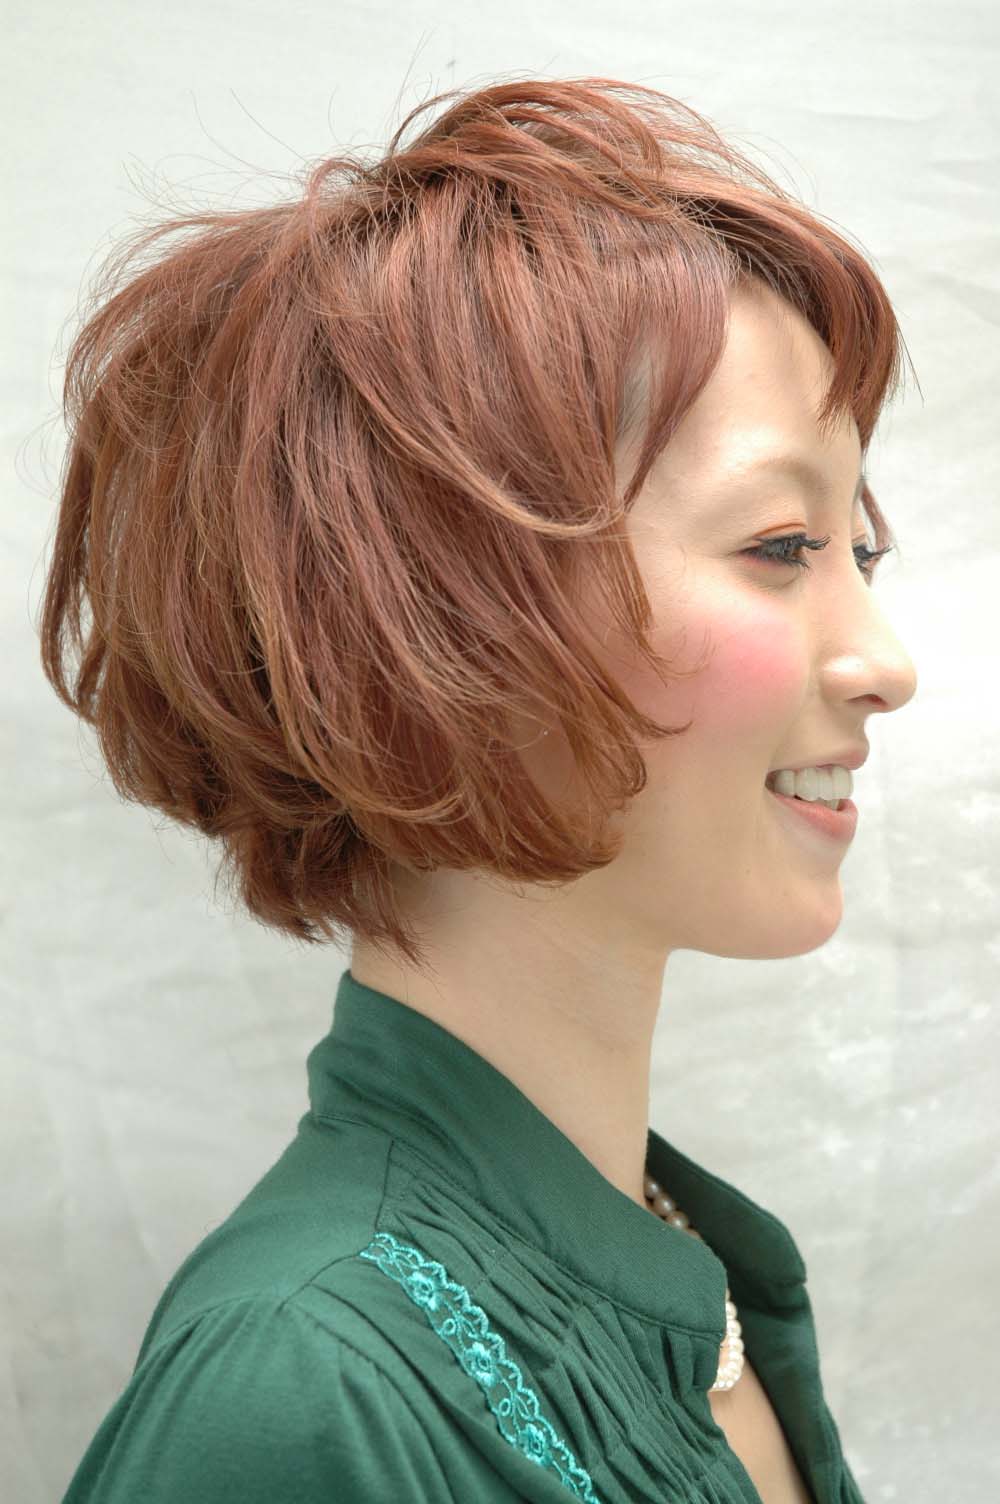 hairstyles popular 2012: The Japanese Traditional ...